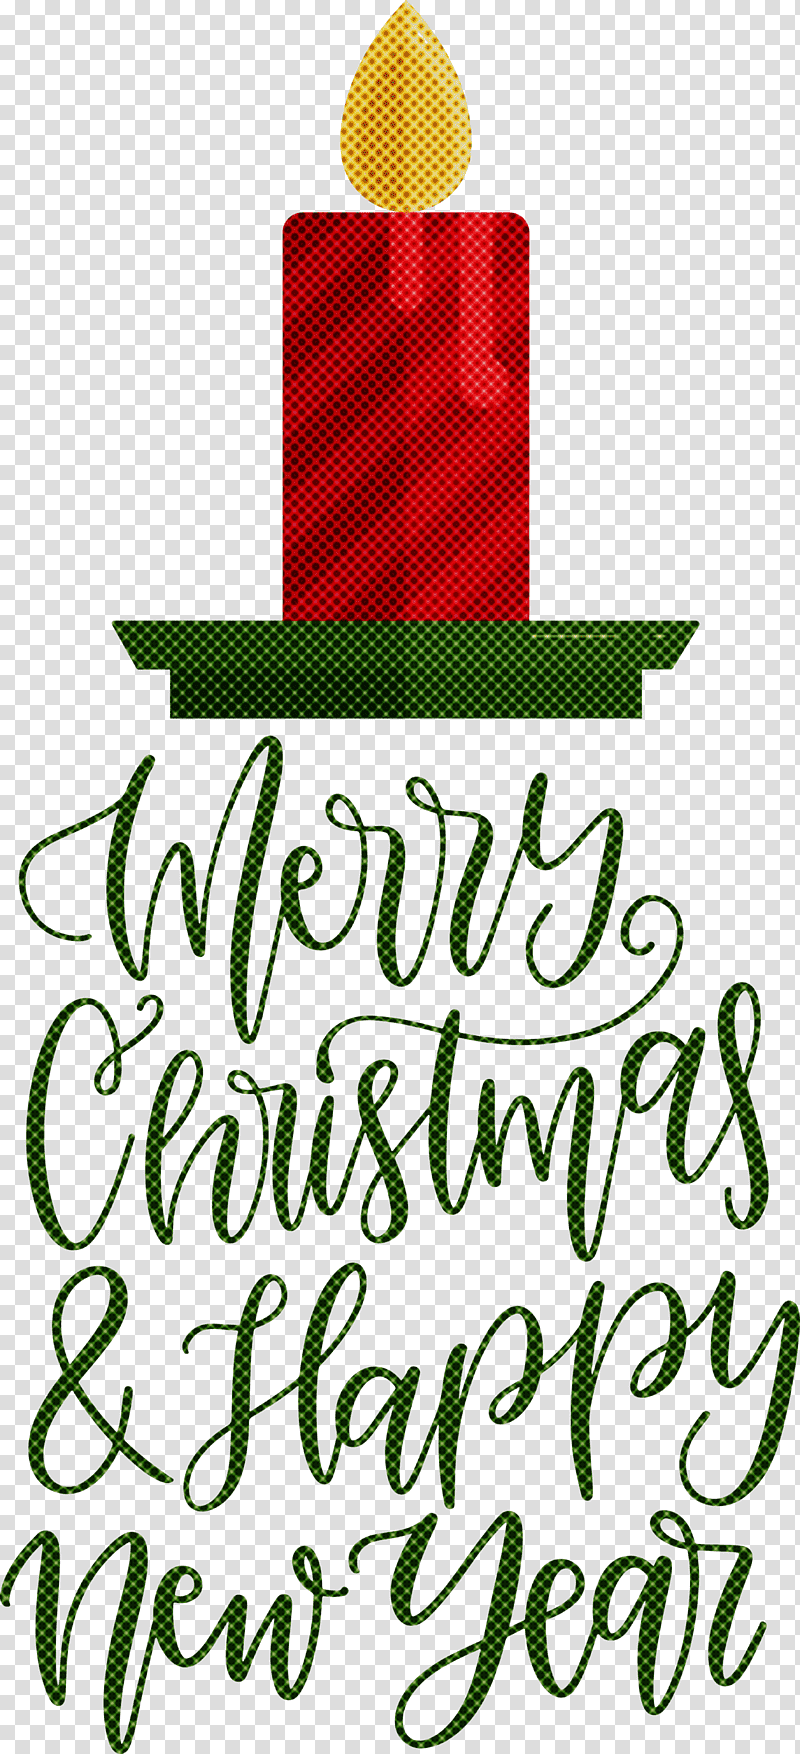 Merry Christmas Happy New Year, Christmas Tree, Calligraphy, Ornament, Christmas Day, Christmas Ornament, Holiday transparent background PNG clipart